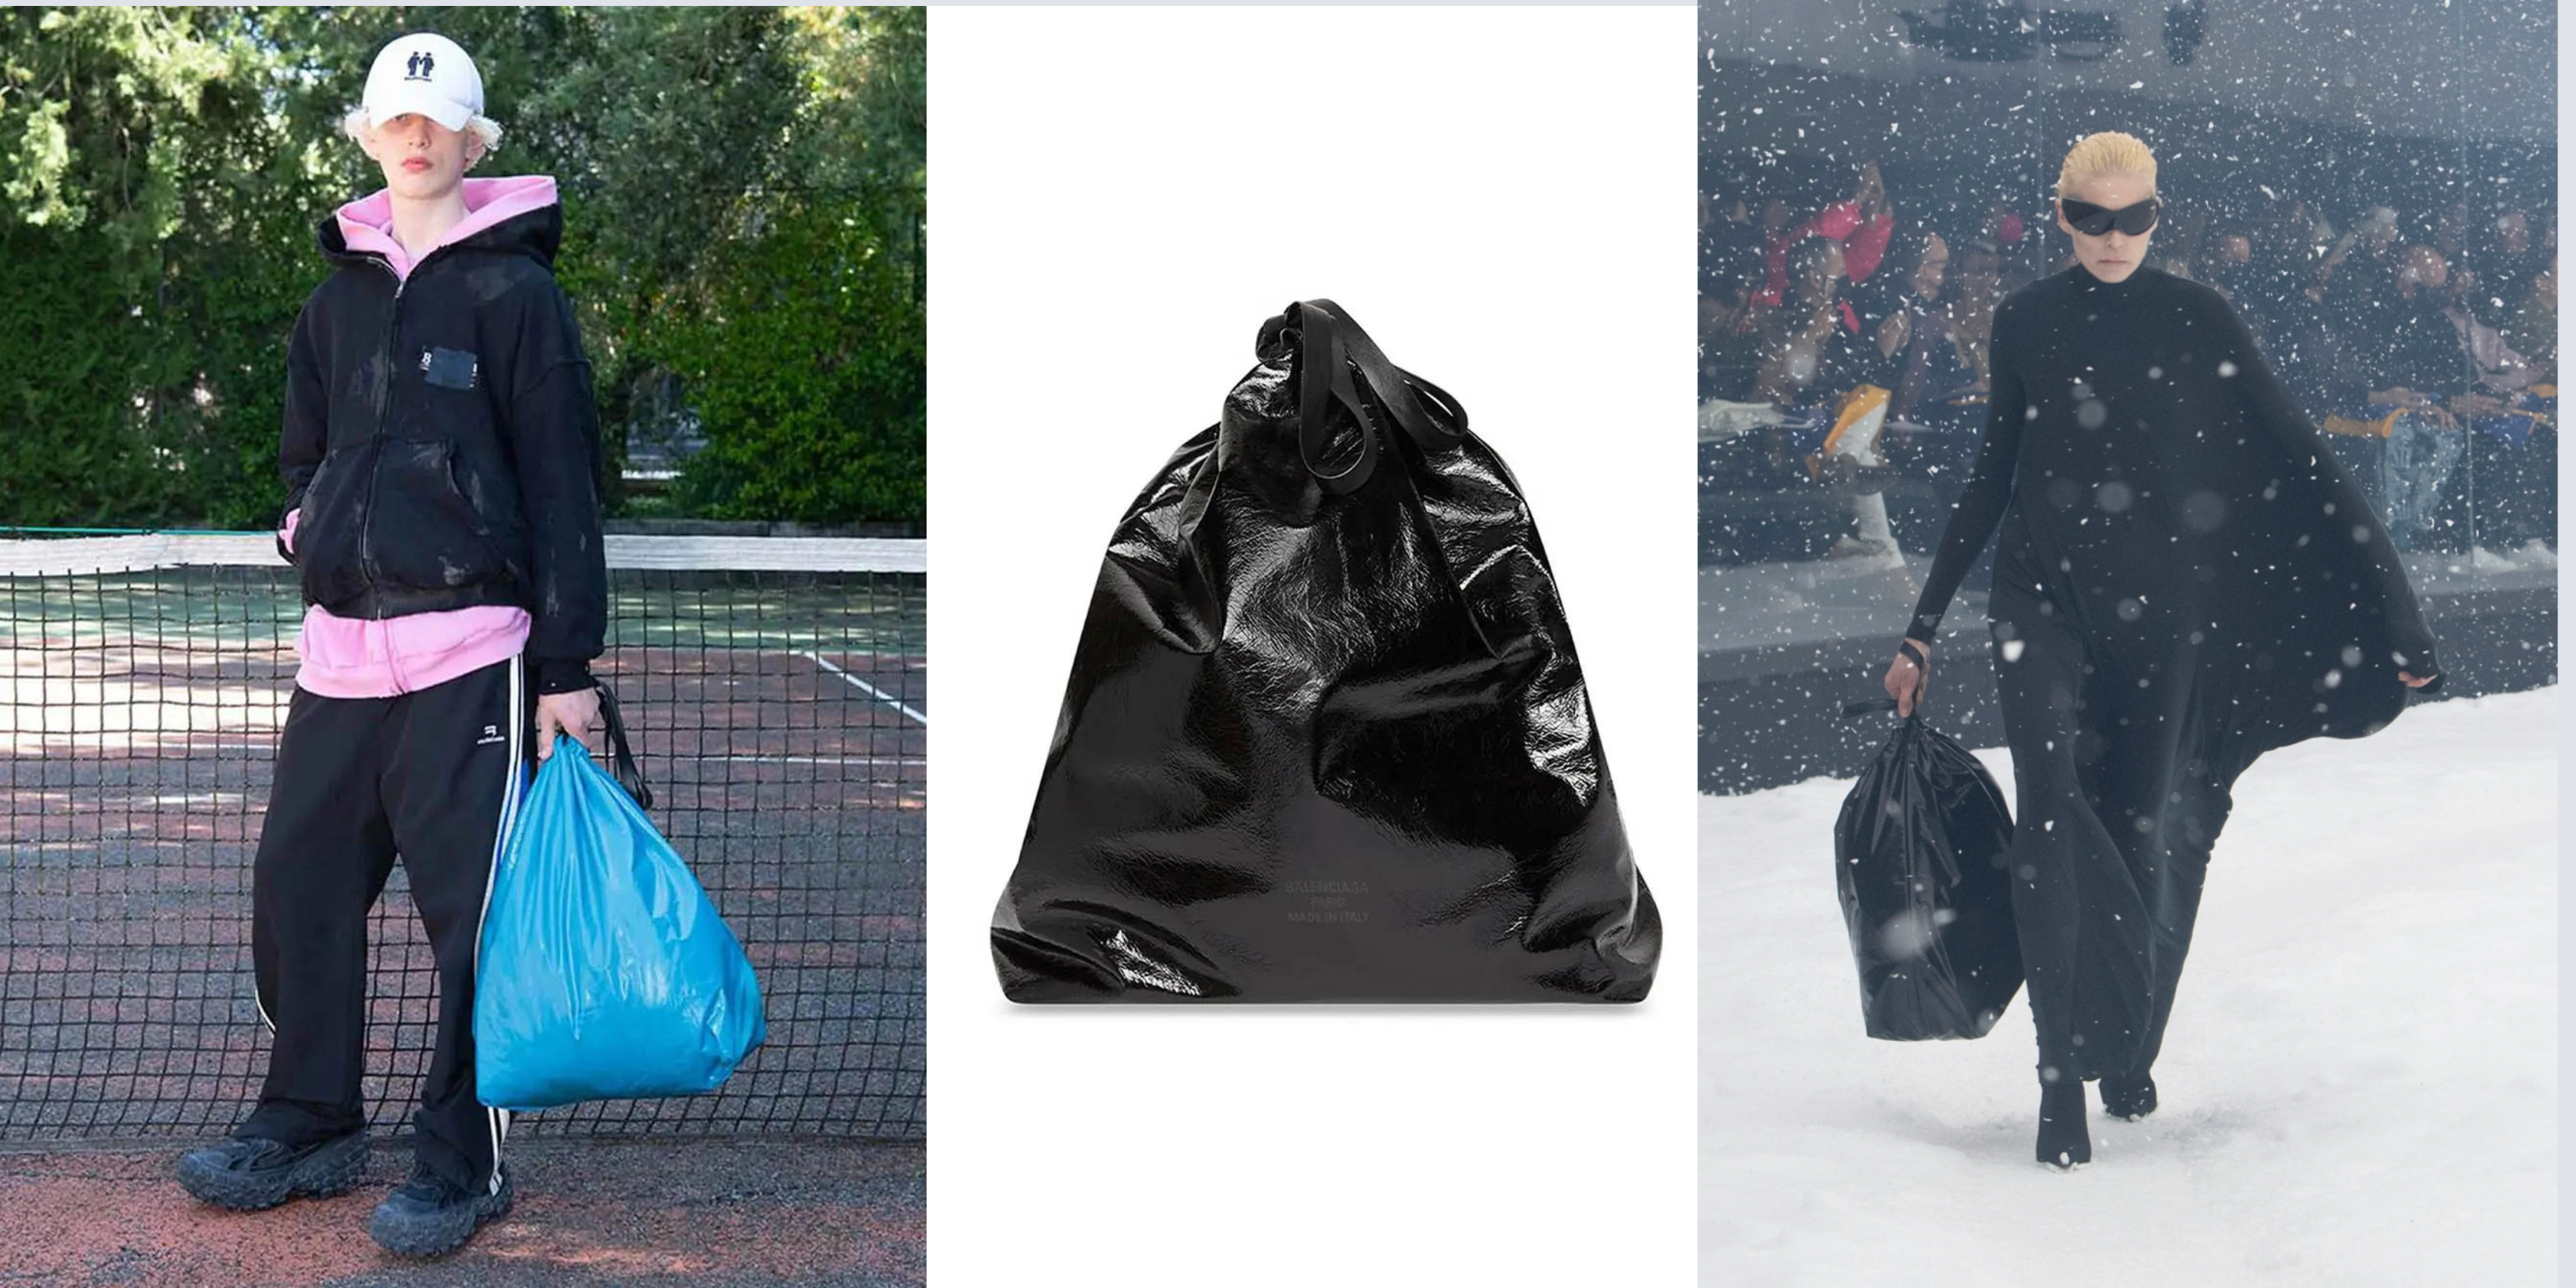 Instagram users are baffled by Balenciaga's $1,790 garbage bags: 'They  belong in the trash